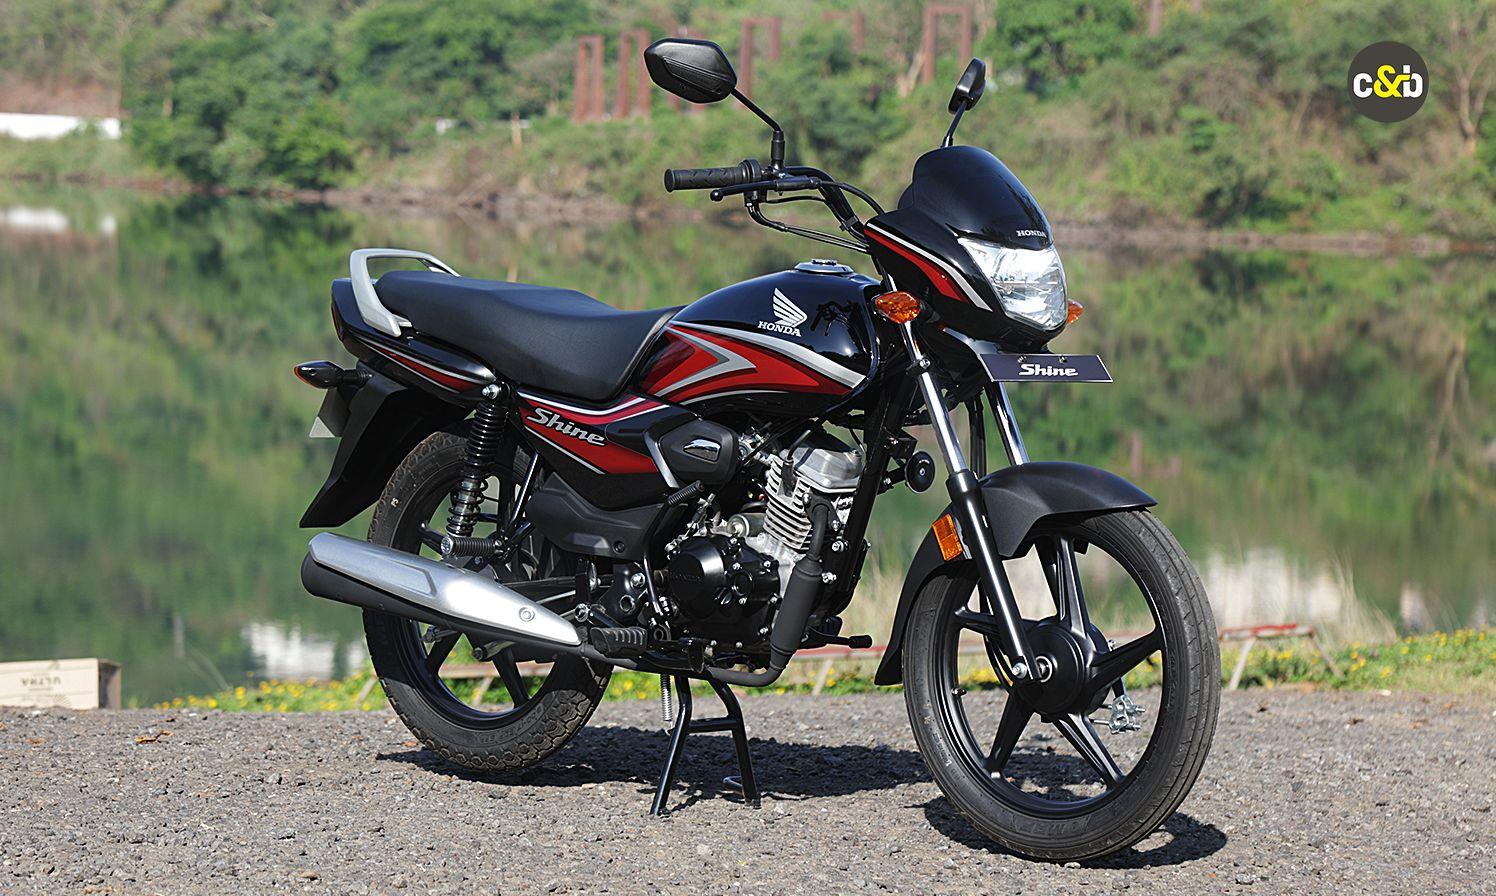 Honda 2Wheelers India sold 43.84 lakh units in the 2023 calendar year, second to Hero MotoCorp’s 54.99 lakh units sold during the same period